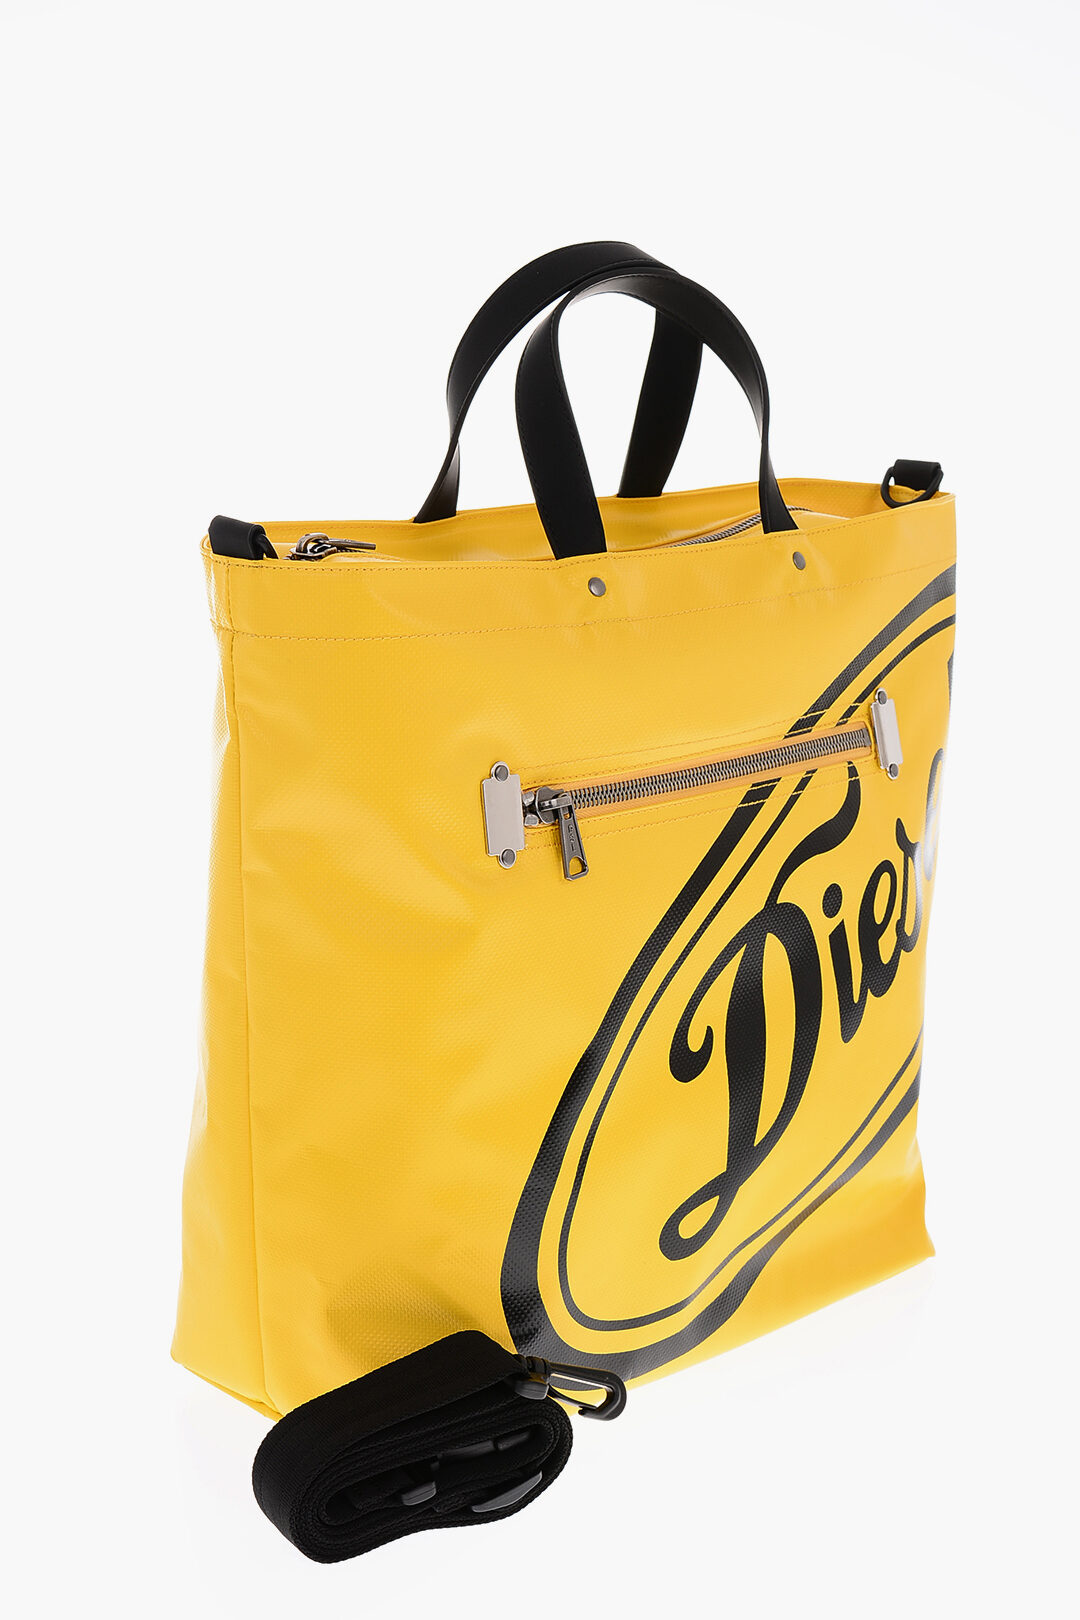 Logo Printed Curty Tote Bag with Removable Shoulder Strap Size unica